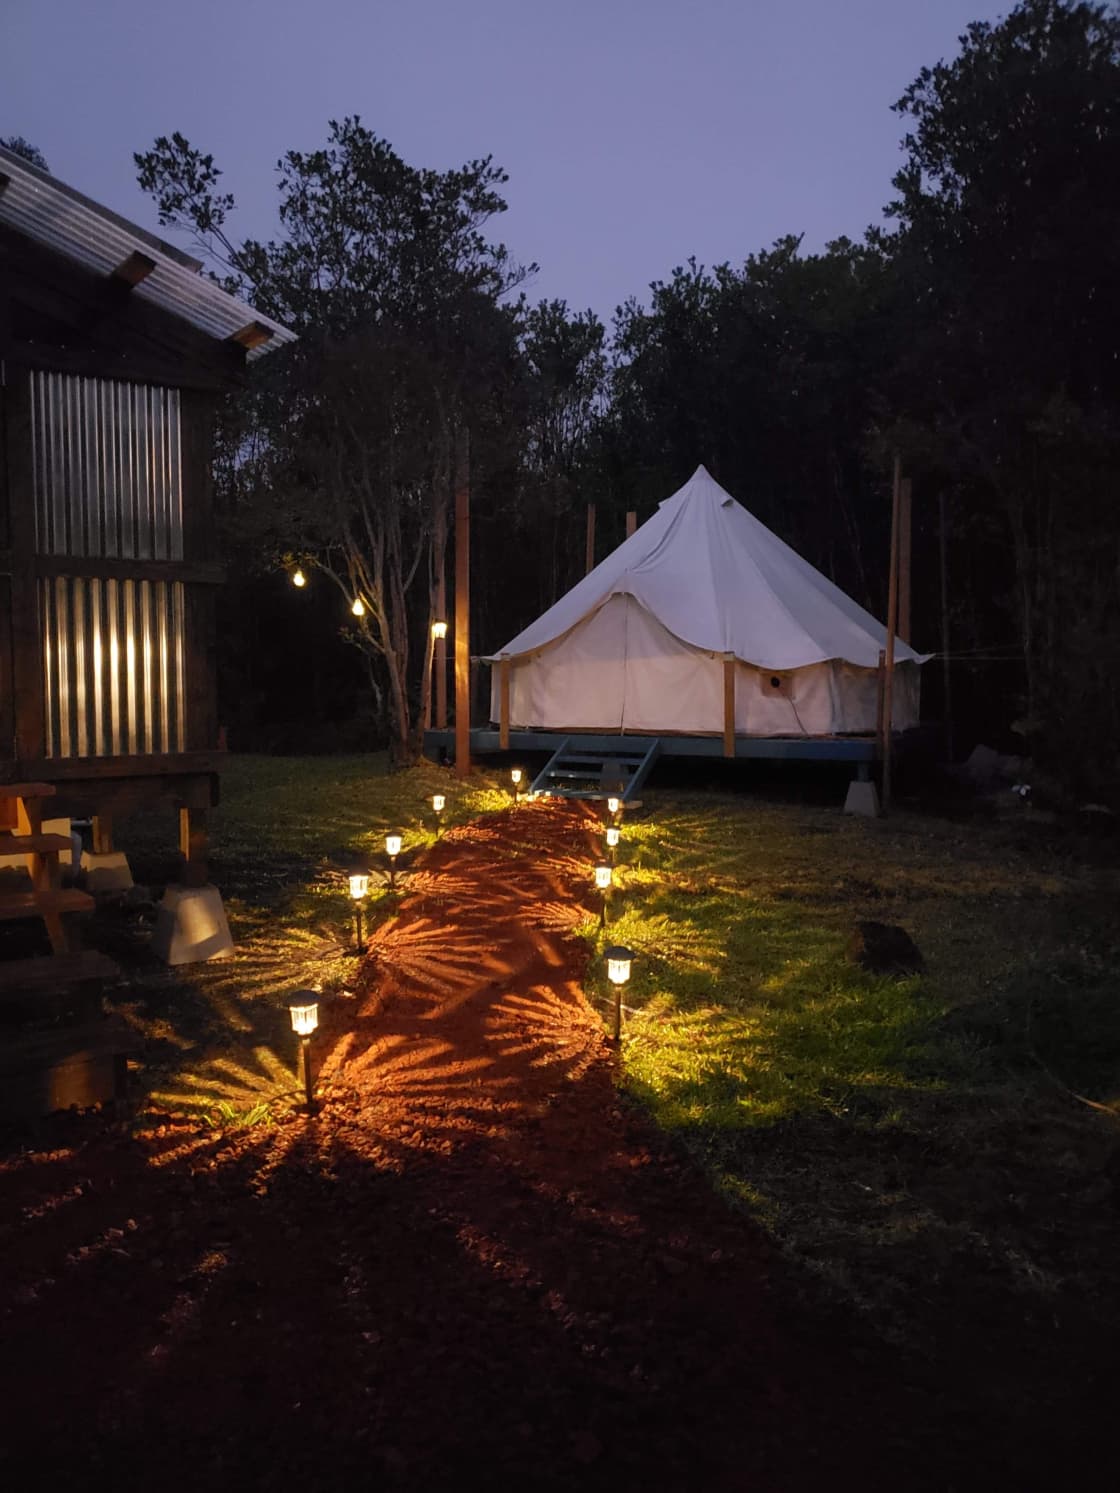 Welcome to Glamping!